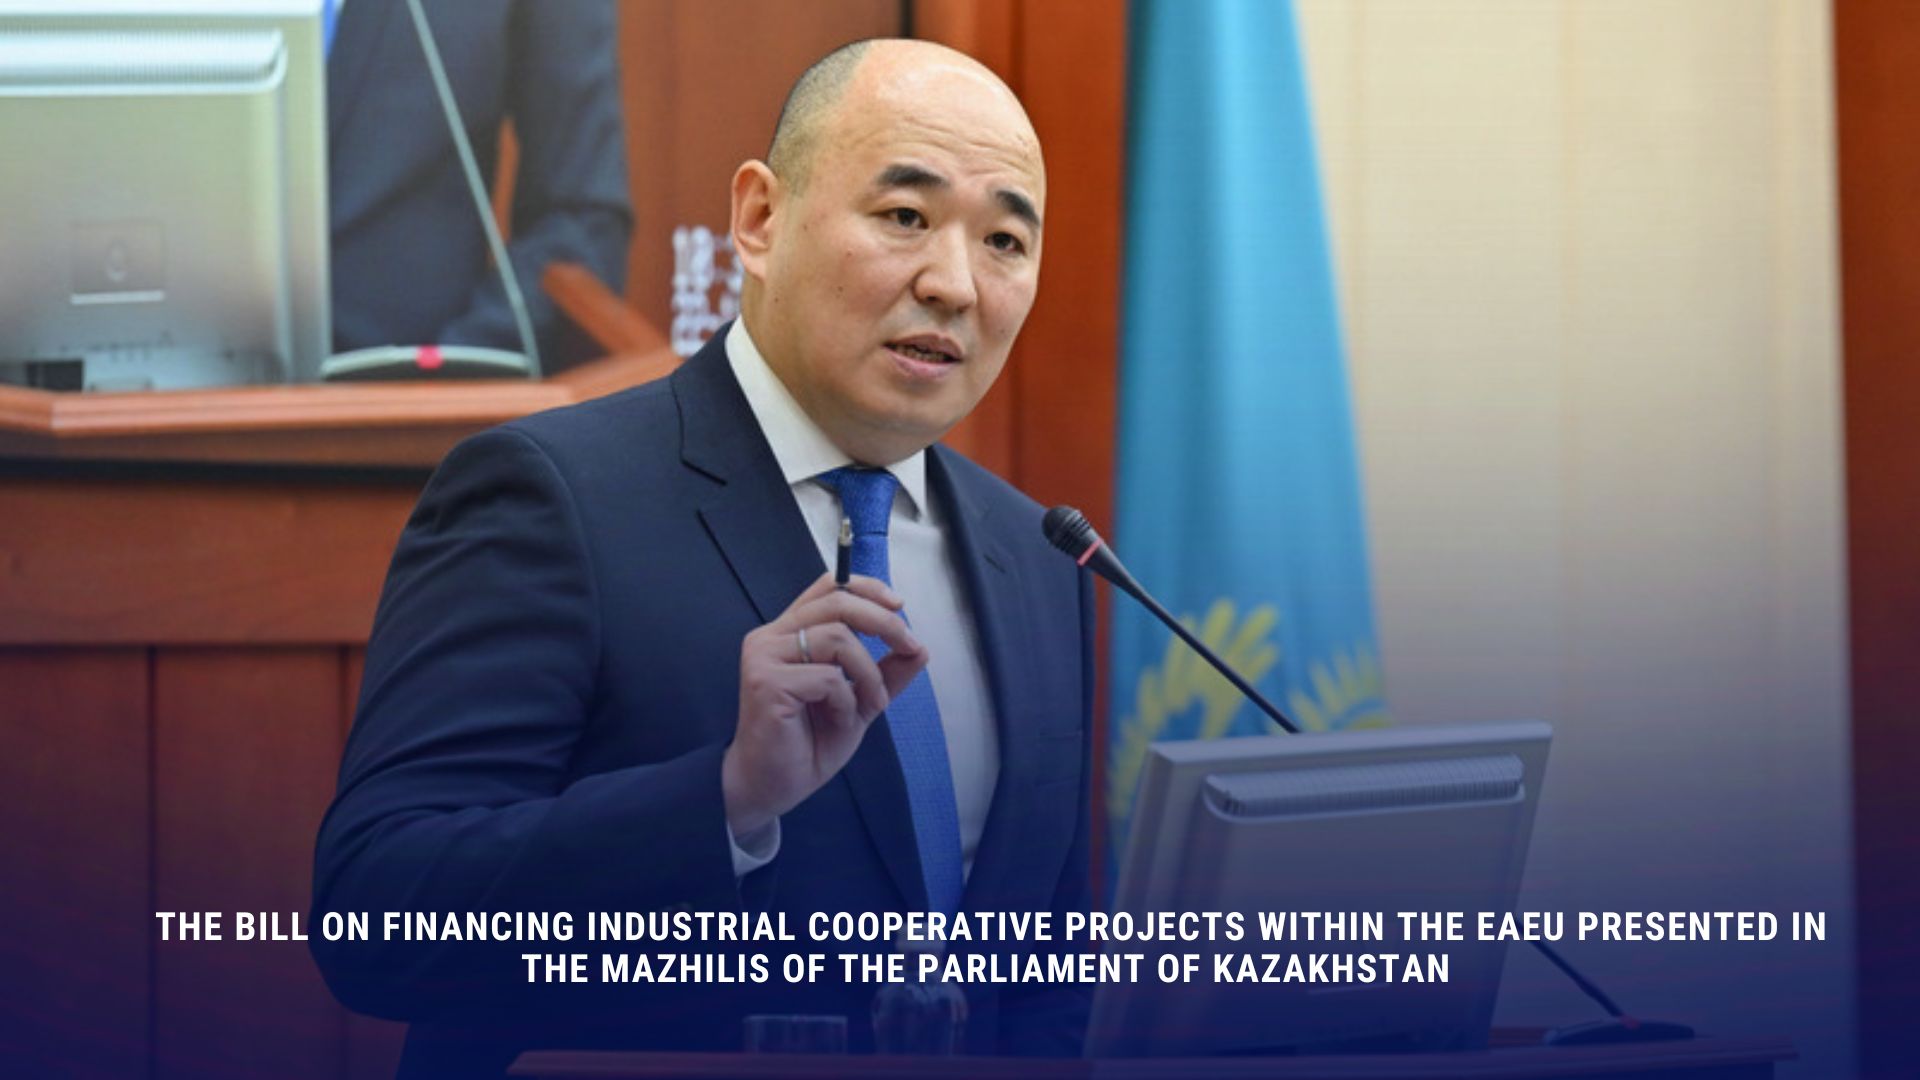 The bill on financing industrial cooperative projects within the EAEU presented in the Mazhilis of the Parliament of Kazakhstan